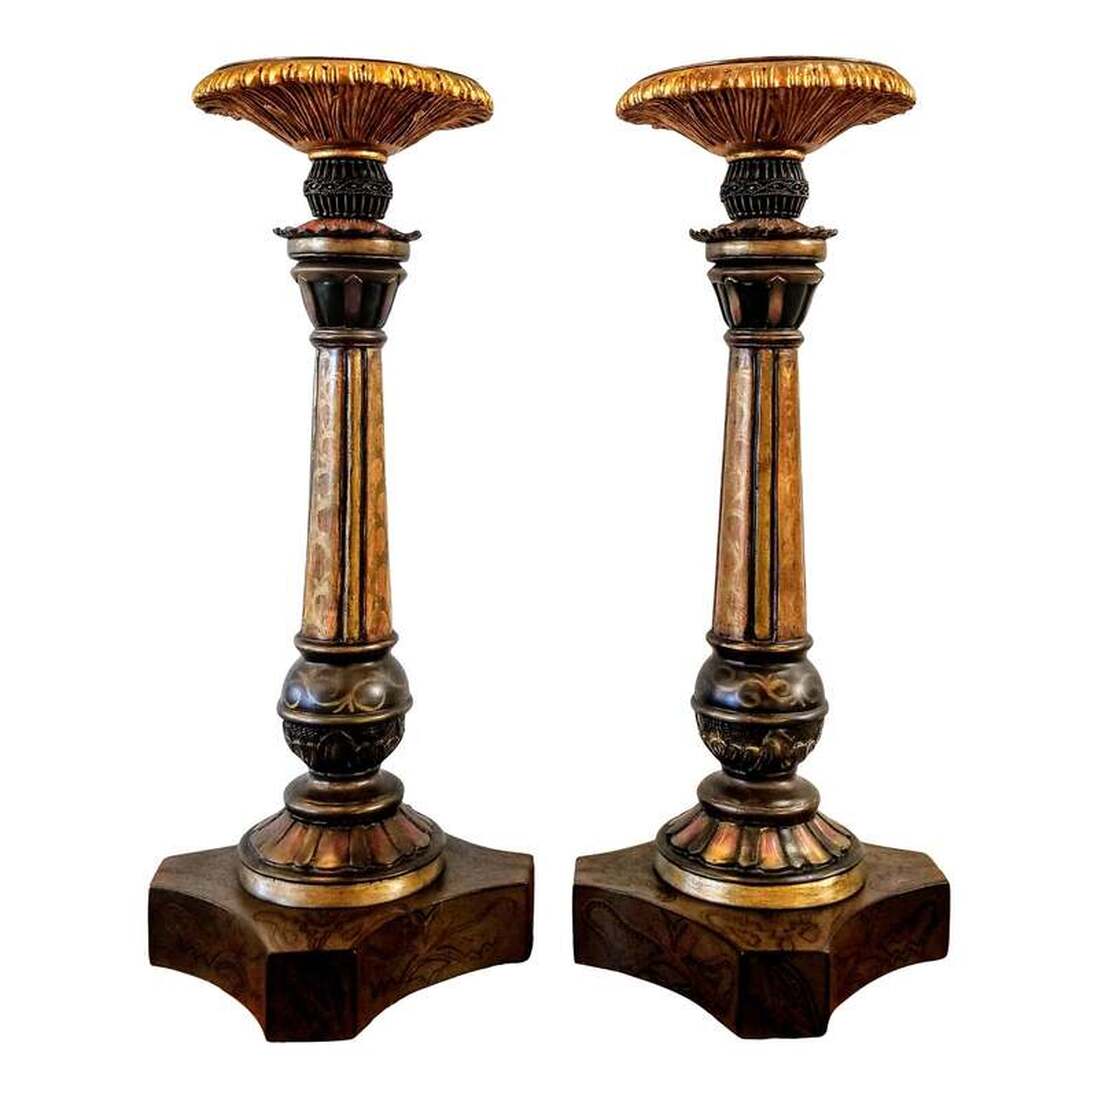 John-Richard has been designing for the luxury interior decoration market since 1980.  This pair of post-1980 large weighted candlesticks are constructed of painted metal, wood, and resin.  The heavy duty candlesticks are painted in tones of gold, black, red, and Spanish green.  The design is a banister style featuring stylized nods to fluting, modelling, cup-and-cover, and egg-and-dart. The candlesticks will complement furnishings from the John-Richard subsidiary Alexander and Mary and will be a whimsical addition to Classical, Jacobean, Carolean, William and Mary, and Renaissance interiors.  A sticker on the bottom states 